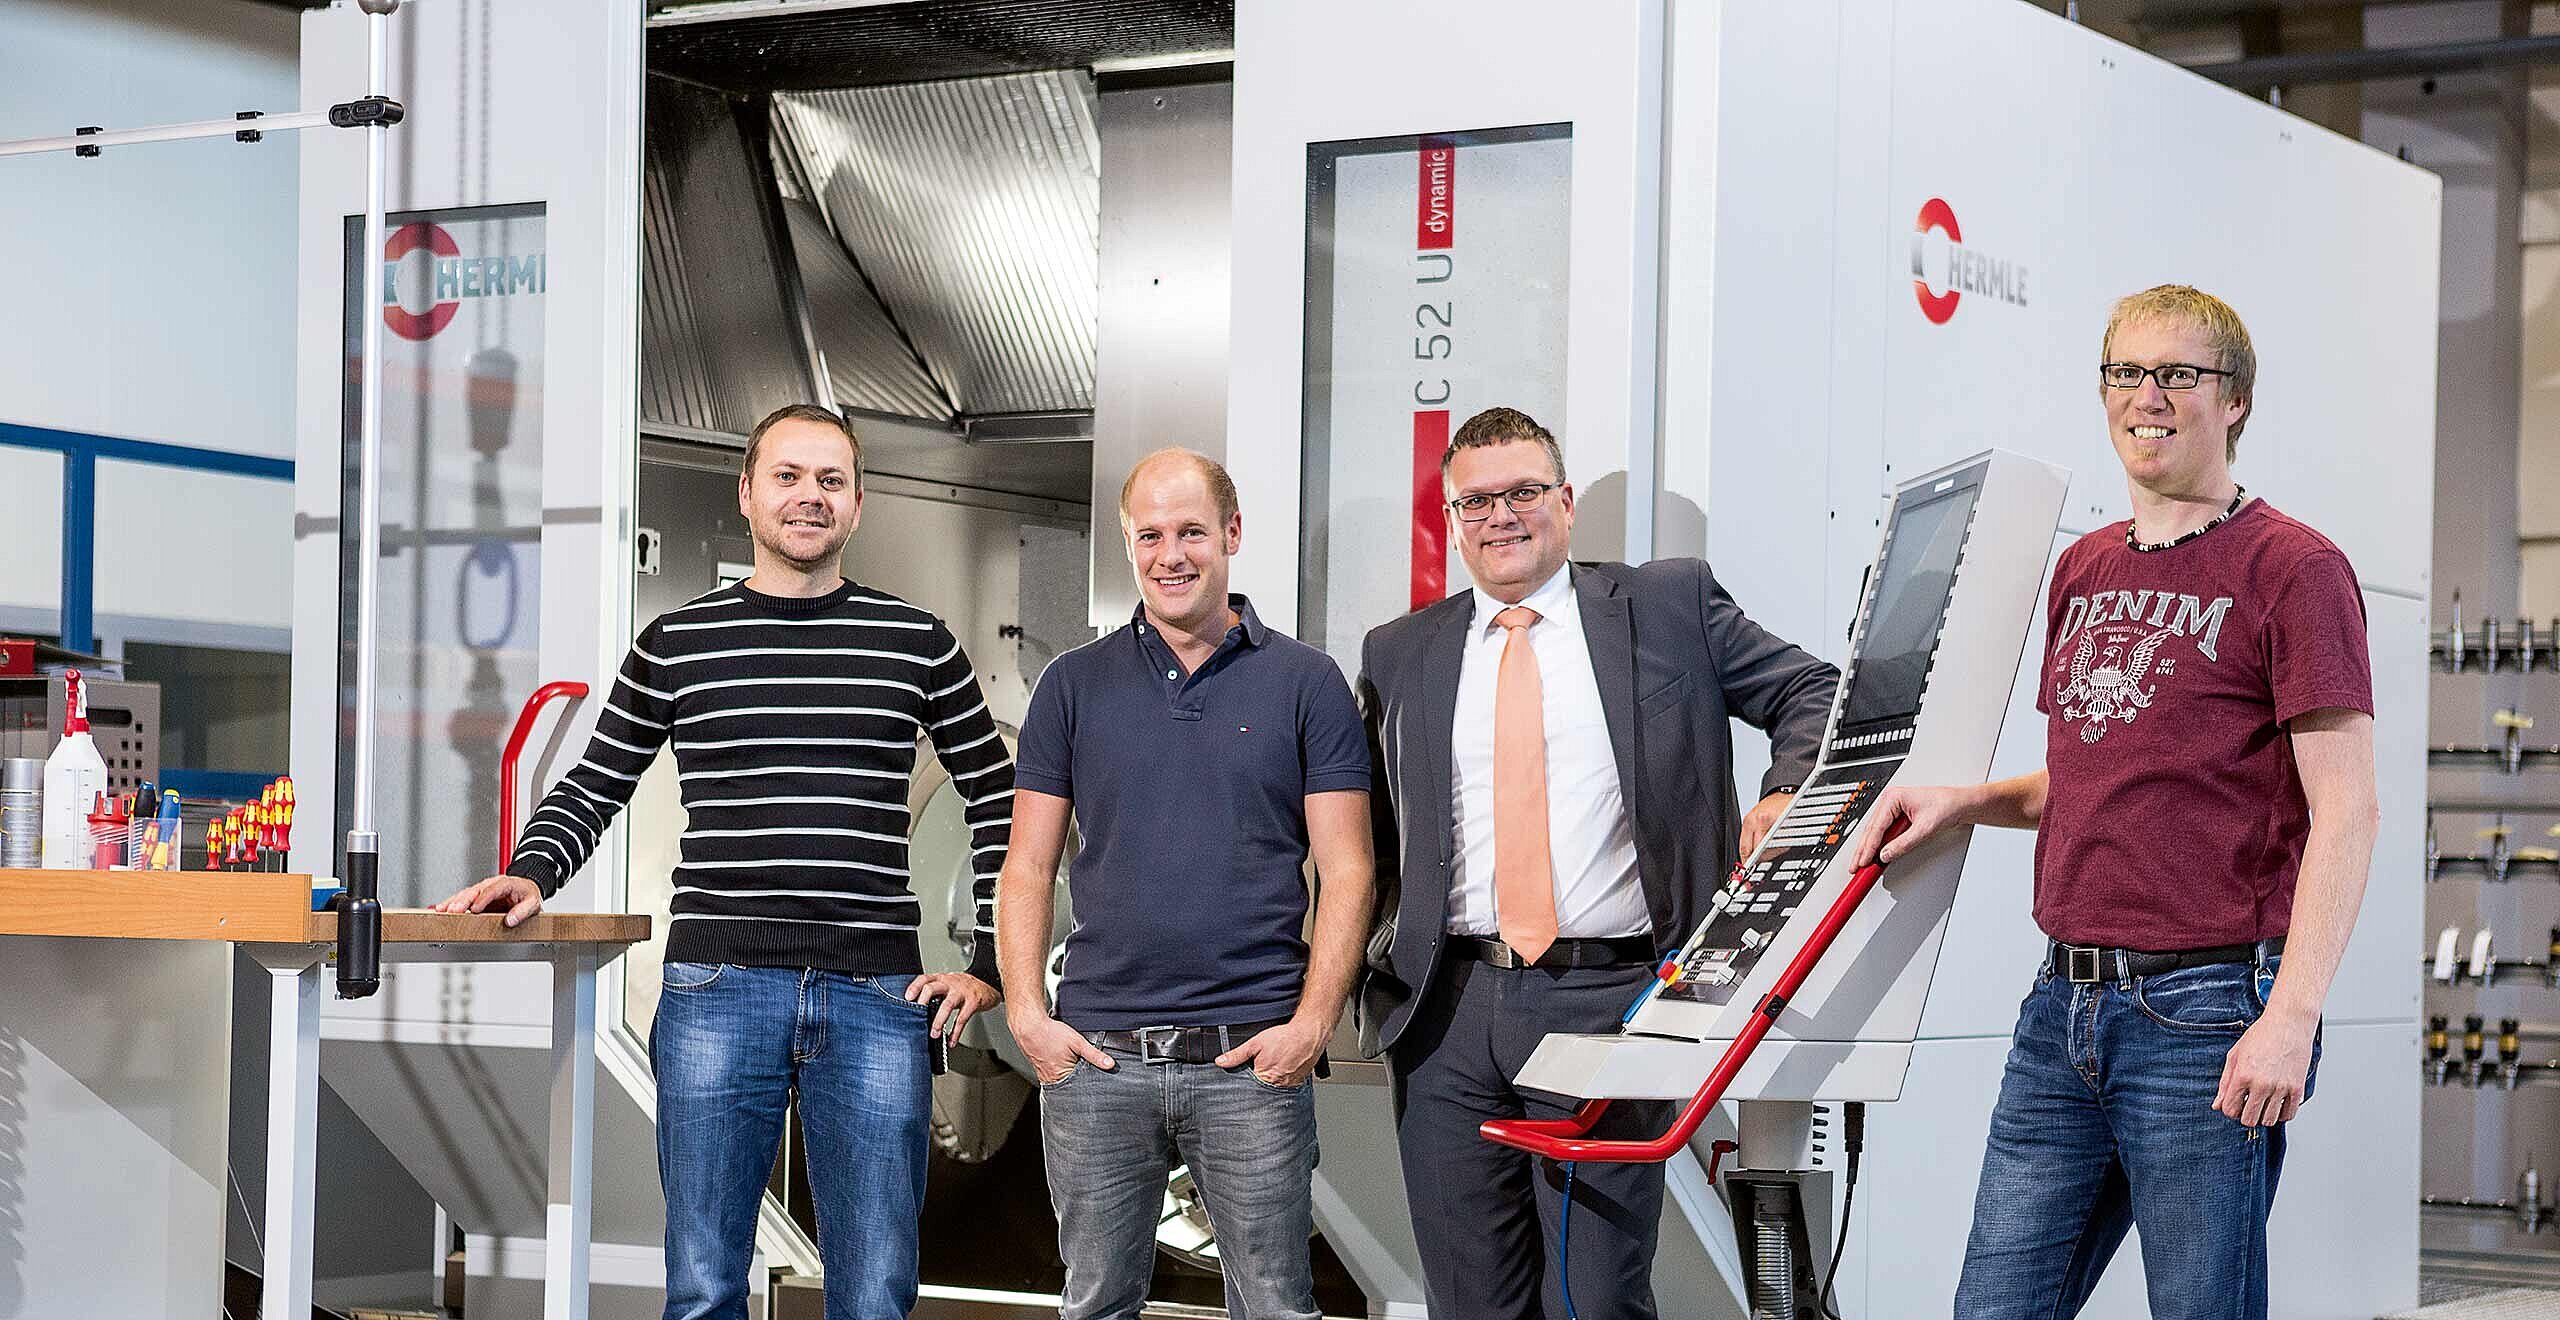 Gerhard Zech, machinery construction manger, Markus Gapp, milling group manager, both from Hirschmann Automotive GmbH, Florian König, sales manager for Austria/South Tyrol at Maschinenfabrik Berthold Hermle AG, and Andreas Bolter, tool and plant construction manager at Hirschmann Automotive GmbH